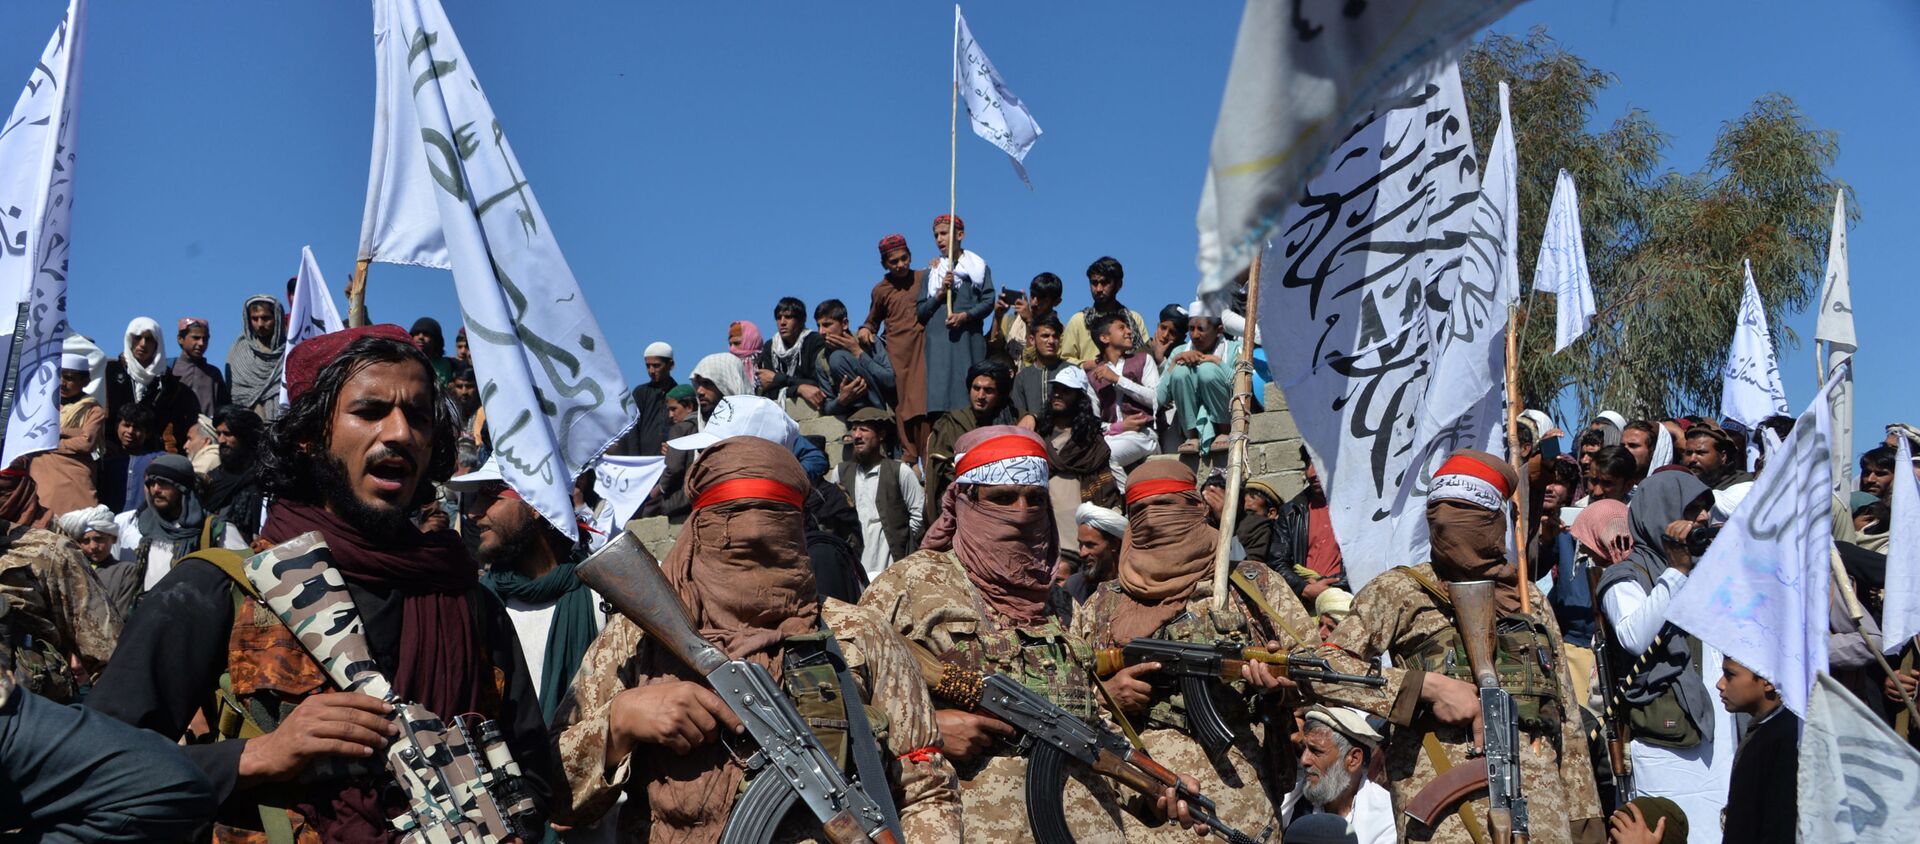 Afghan Taliban militants and villagers attend a gathering as they celebrate the peace deal and their victory in the Afghan conflict on US in Afghanistan, in Alingar district of Laghman Province on March 2, 2020 - Sputnik International, 1920, 15.08.2021